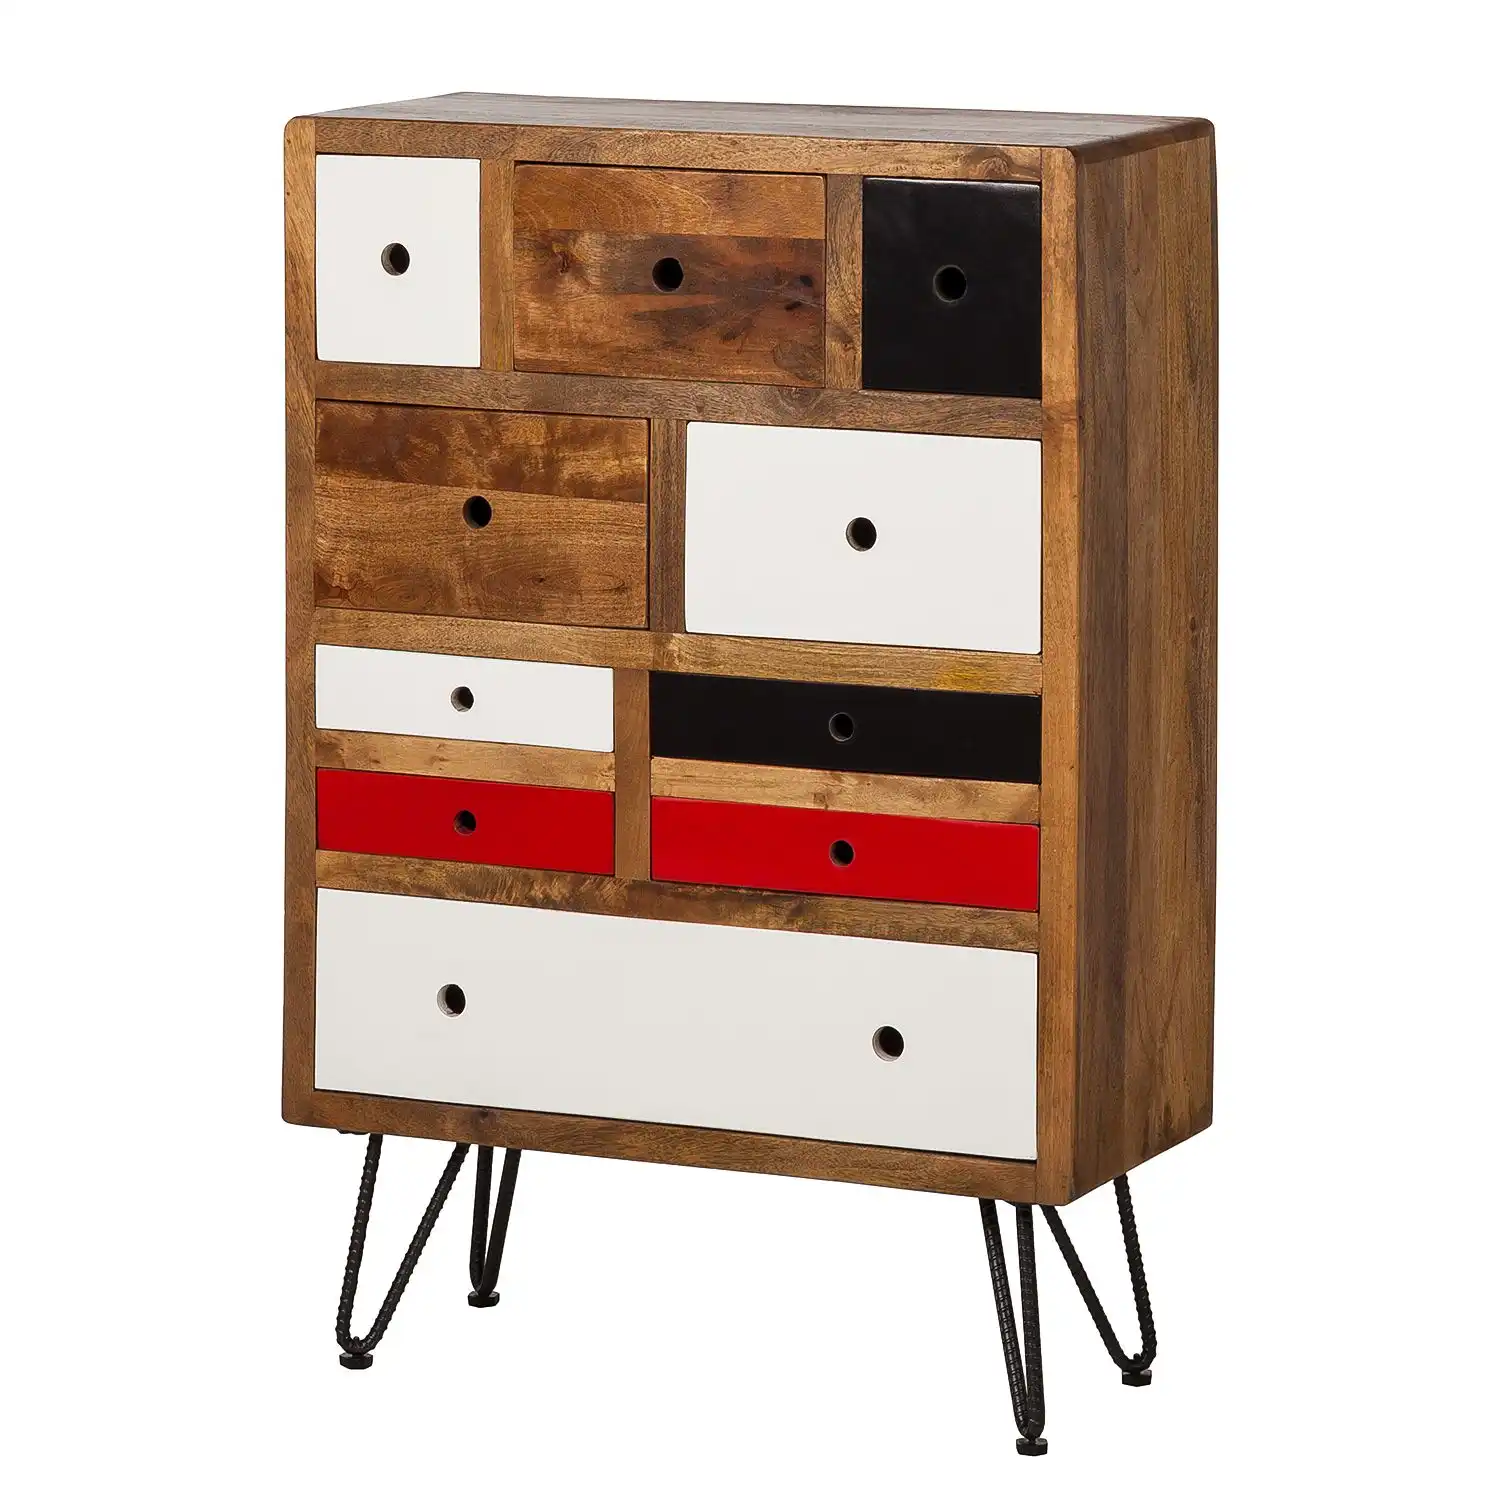 Mango Wood Cabinet with 10 drawers (Knock Down) - popular handicrafts